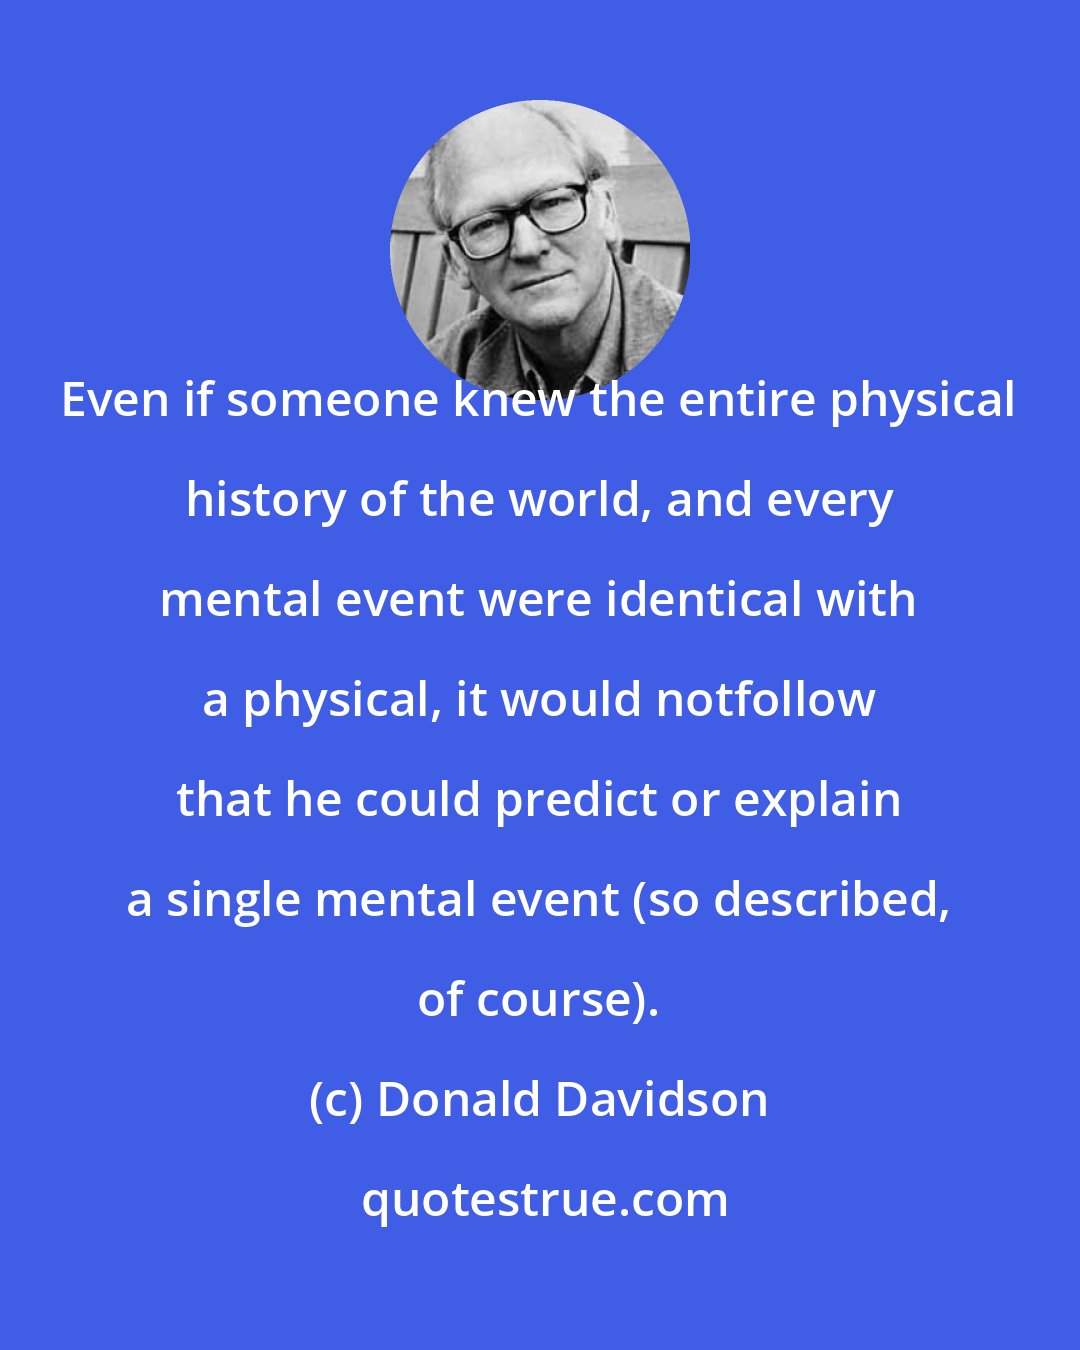 Donald Davidson: Even if someone knew the entire physical history of the world, and every mental event were identical with a physical, it would notfollow that he could predict or explain a single mental event (so described, of course).